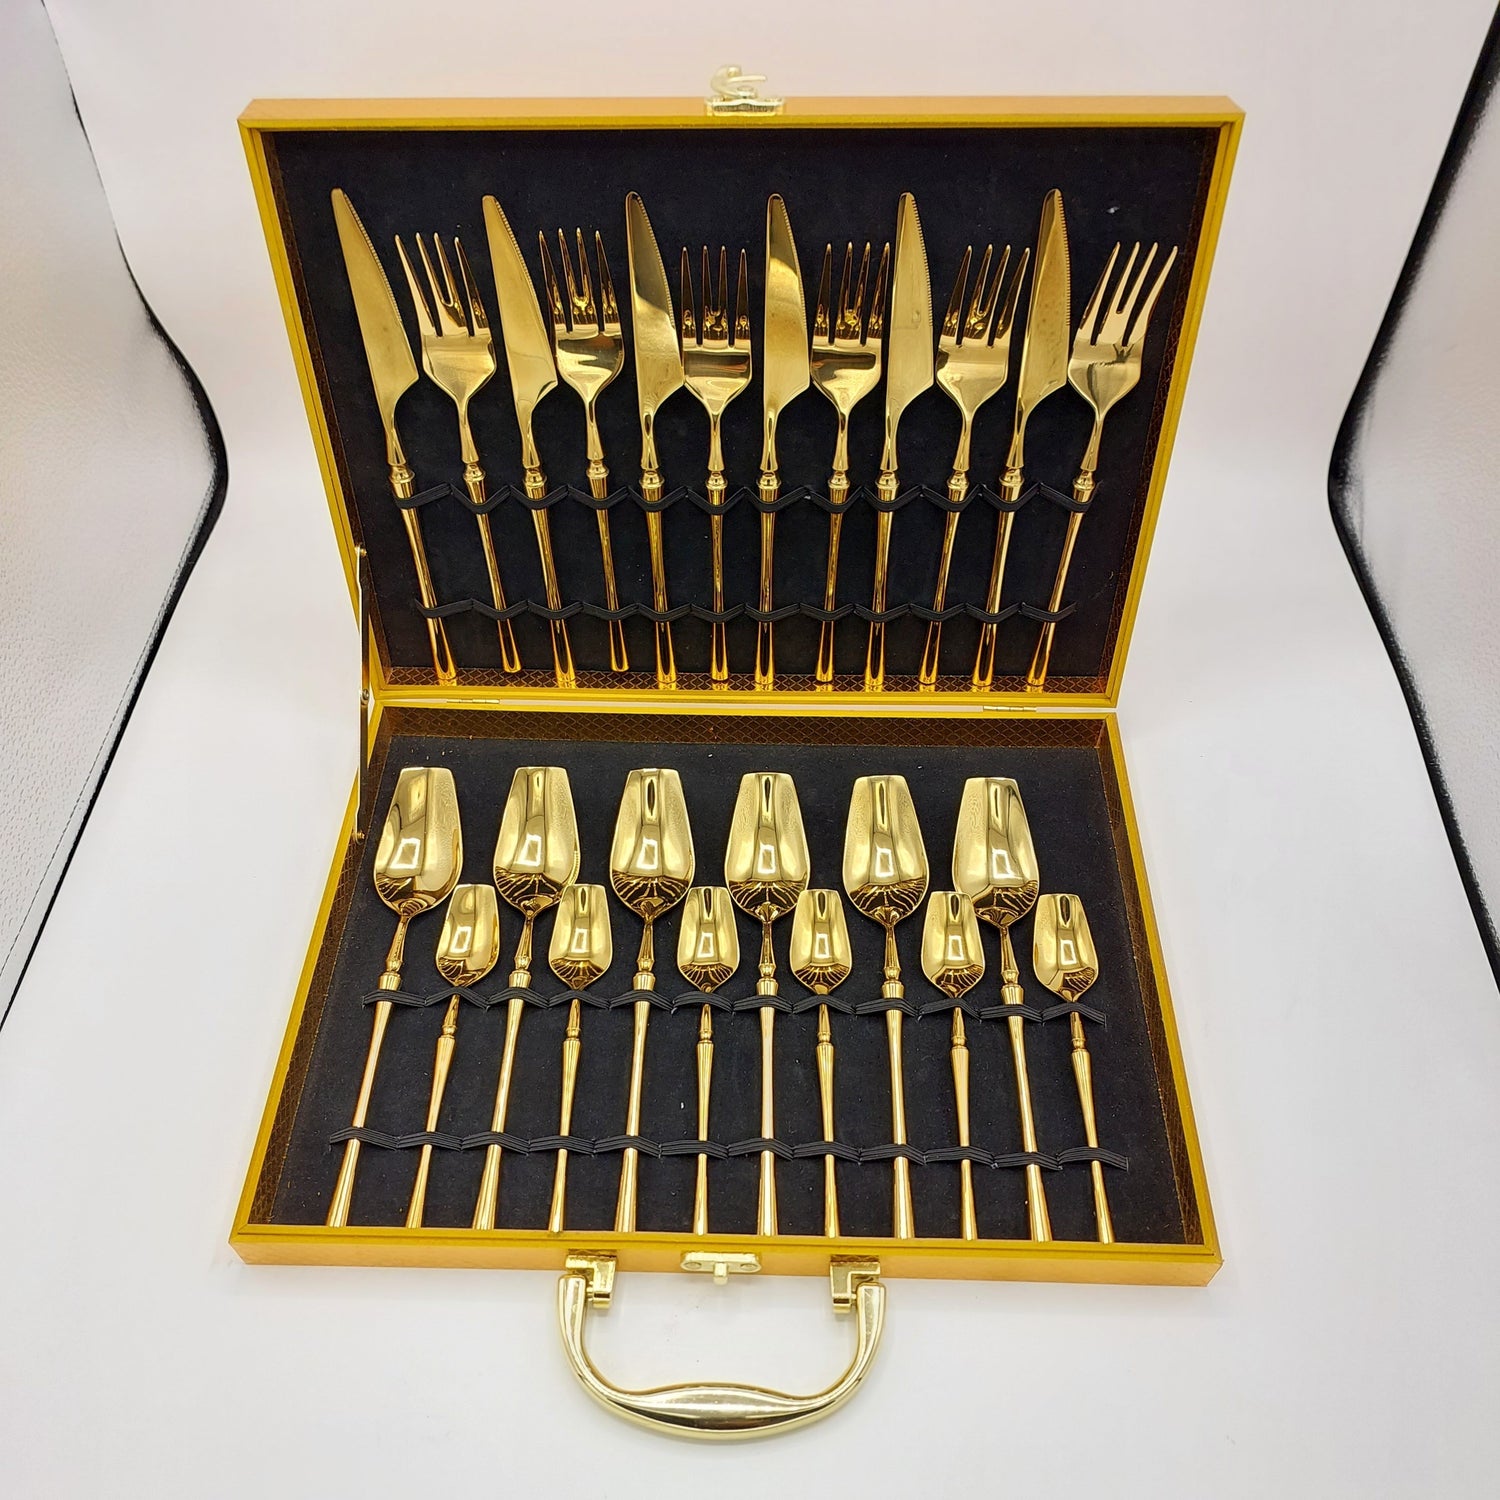 Premium Quality Golden Cutlery for 6 People - 24 Piece Set - Full Golden - Premium best Happy Valentine Day gift from SCORPION KART - Just $220! Shop now at SCORPION KART